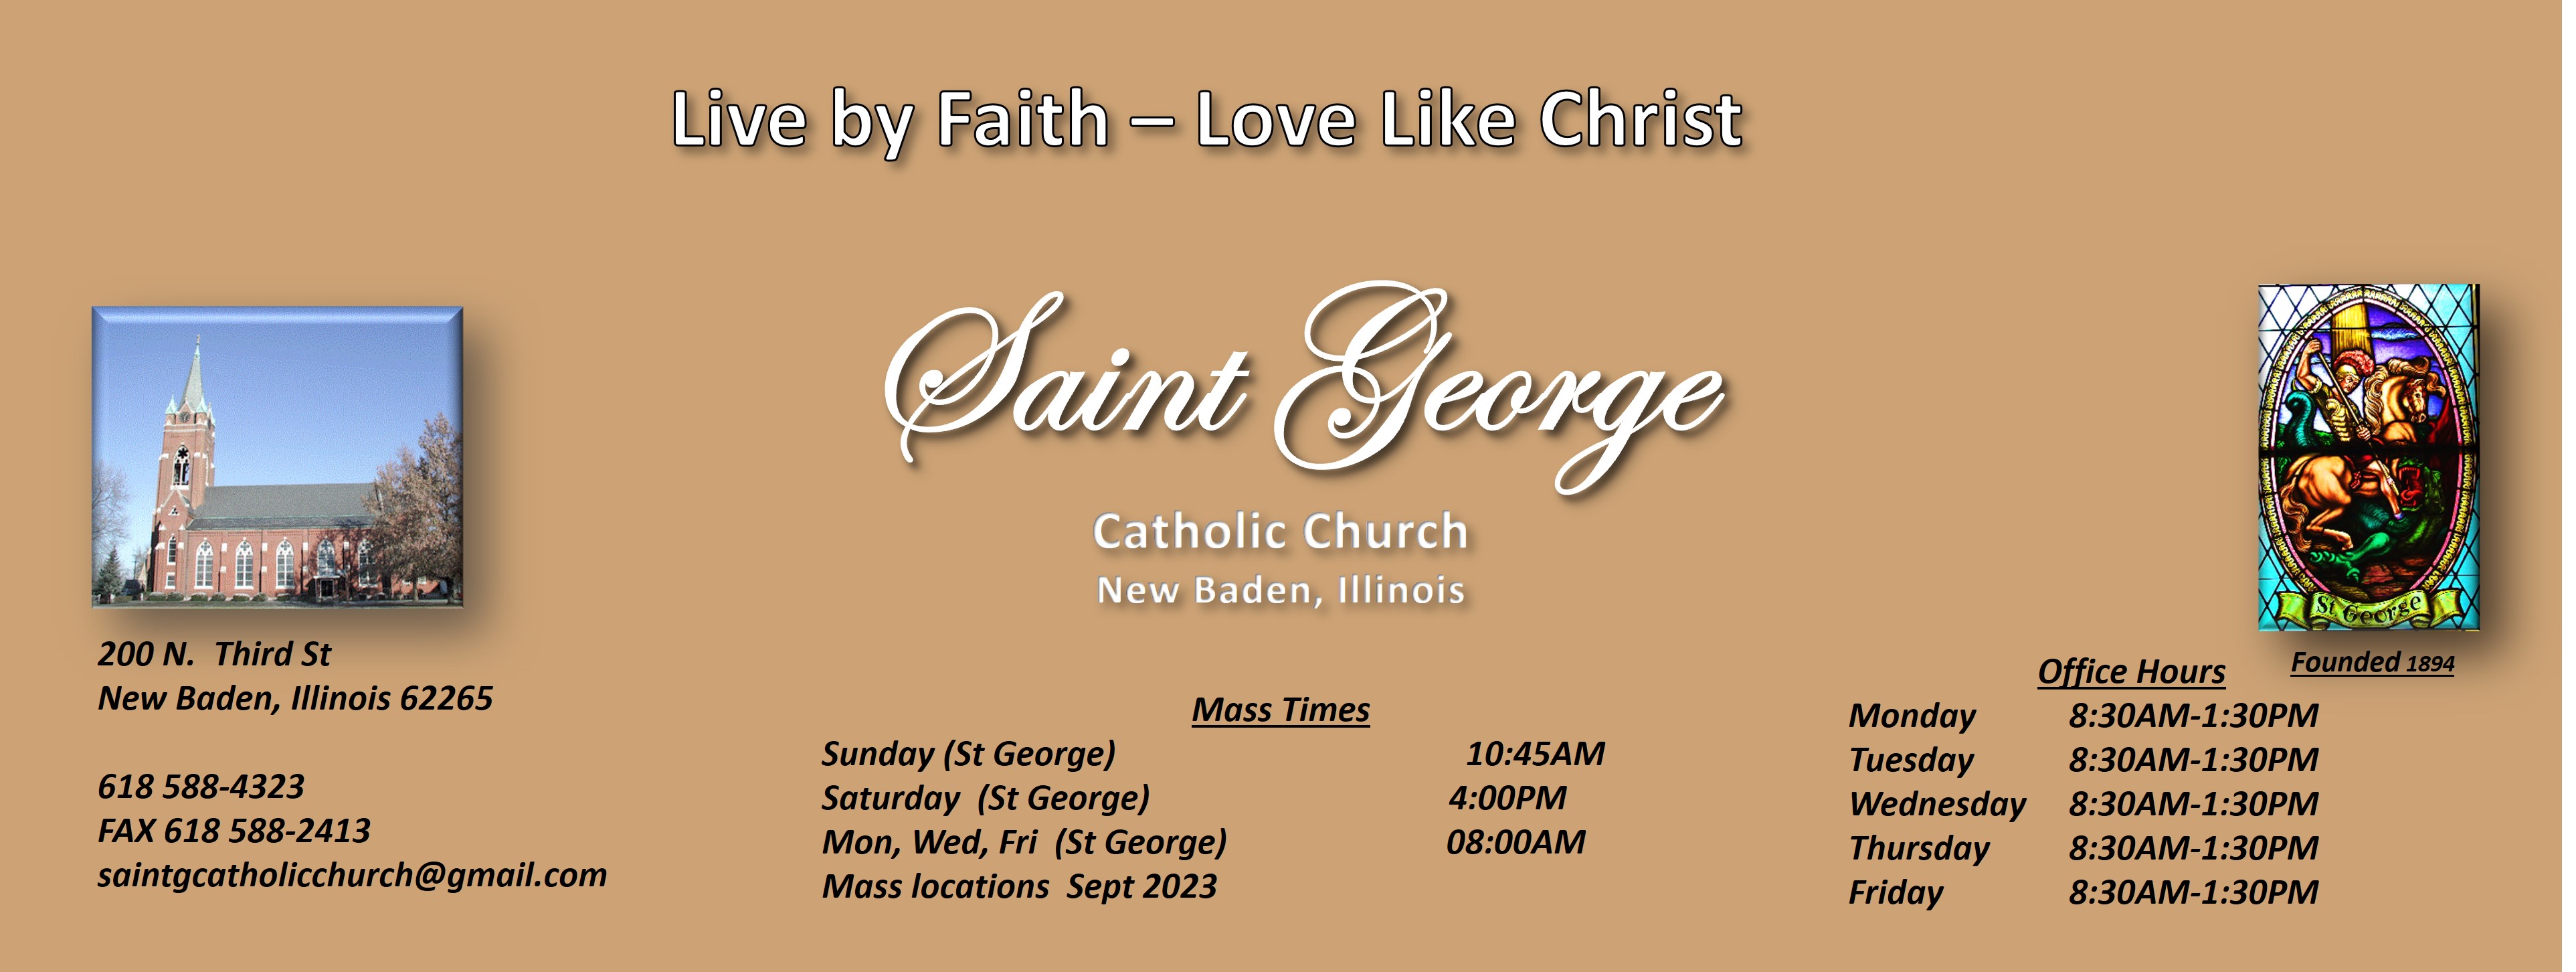 St George home page header image